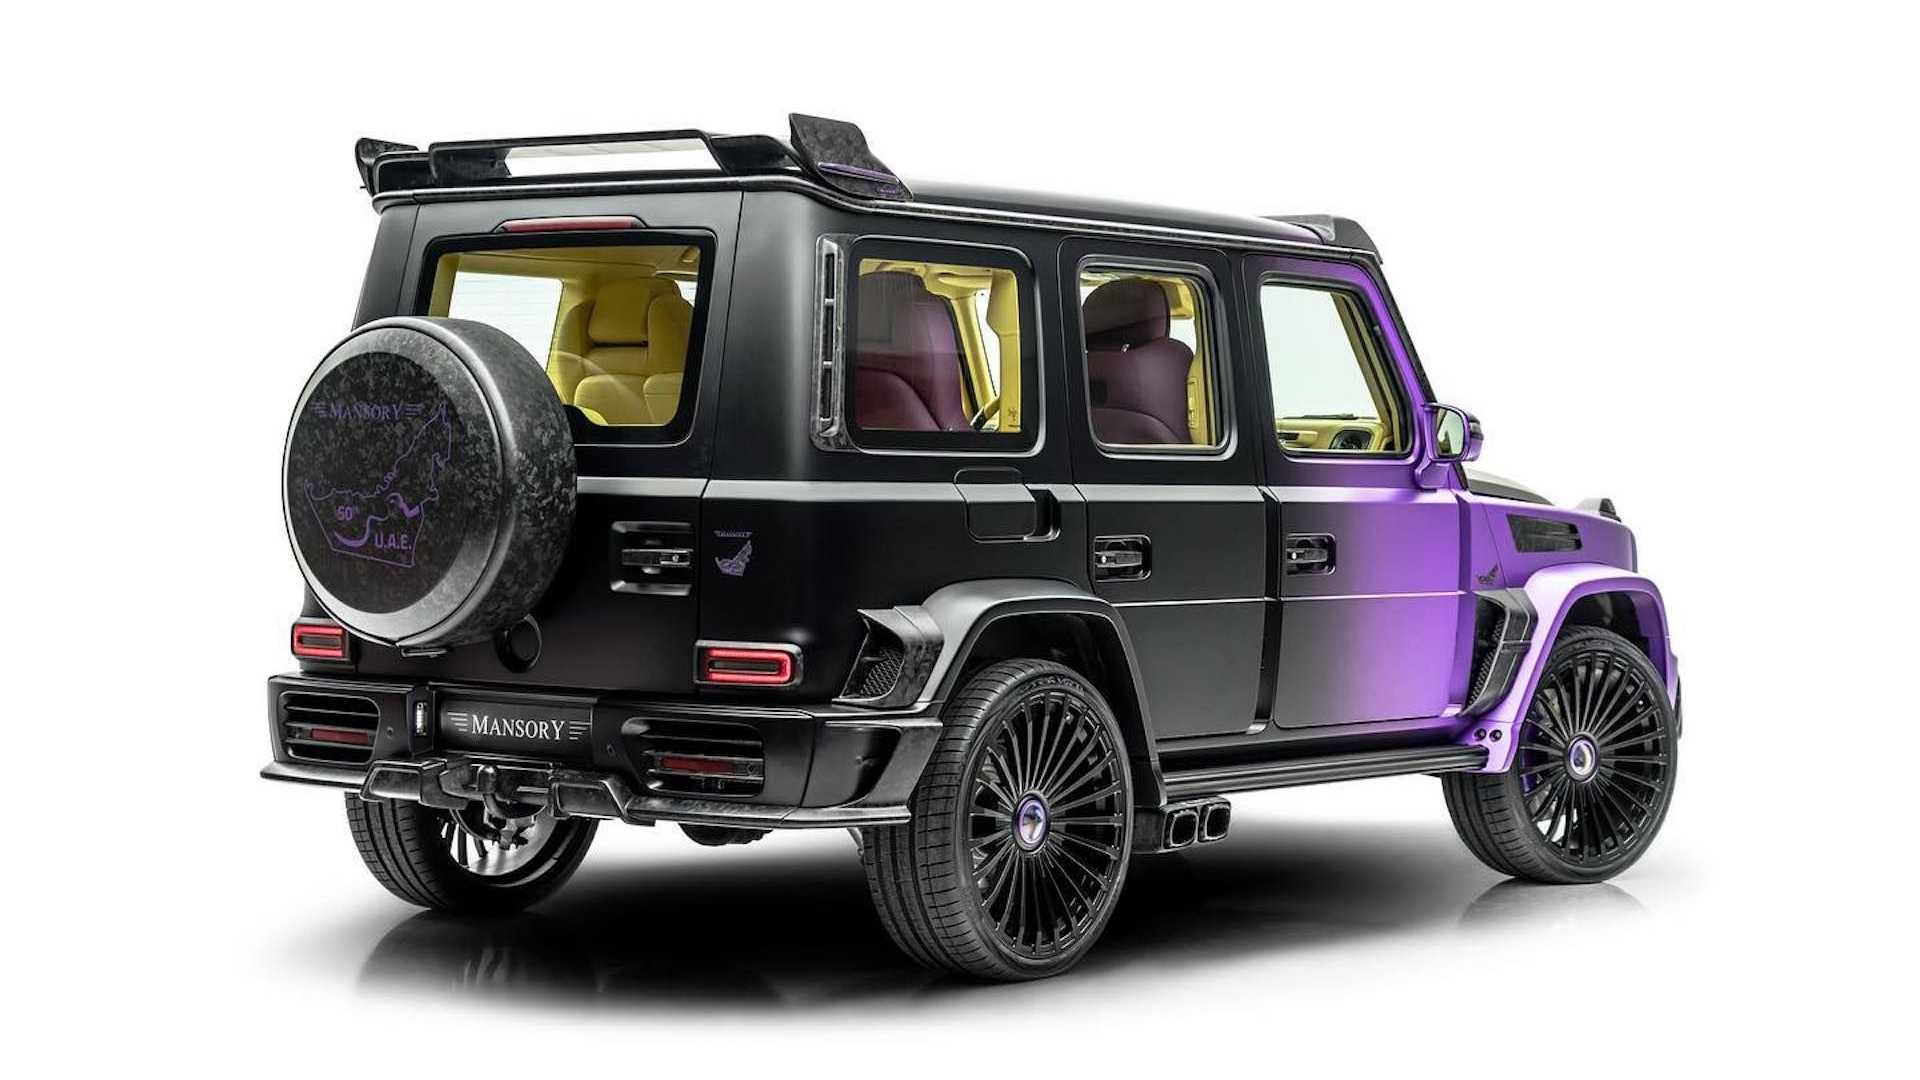 This tacky Mercedes-AMG G63 P900 goes to the Emirates